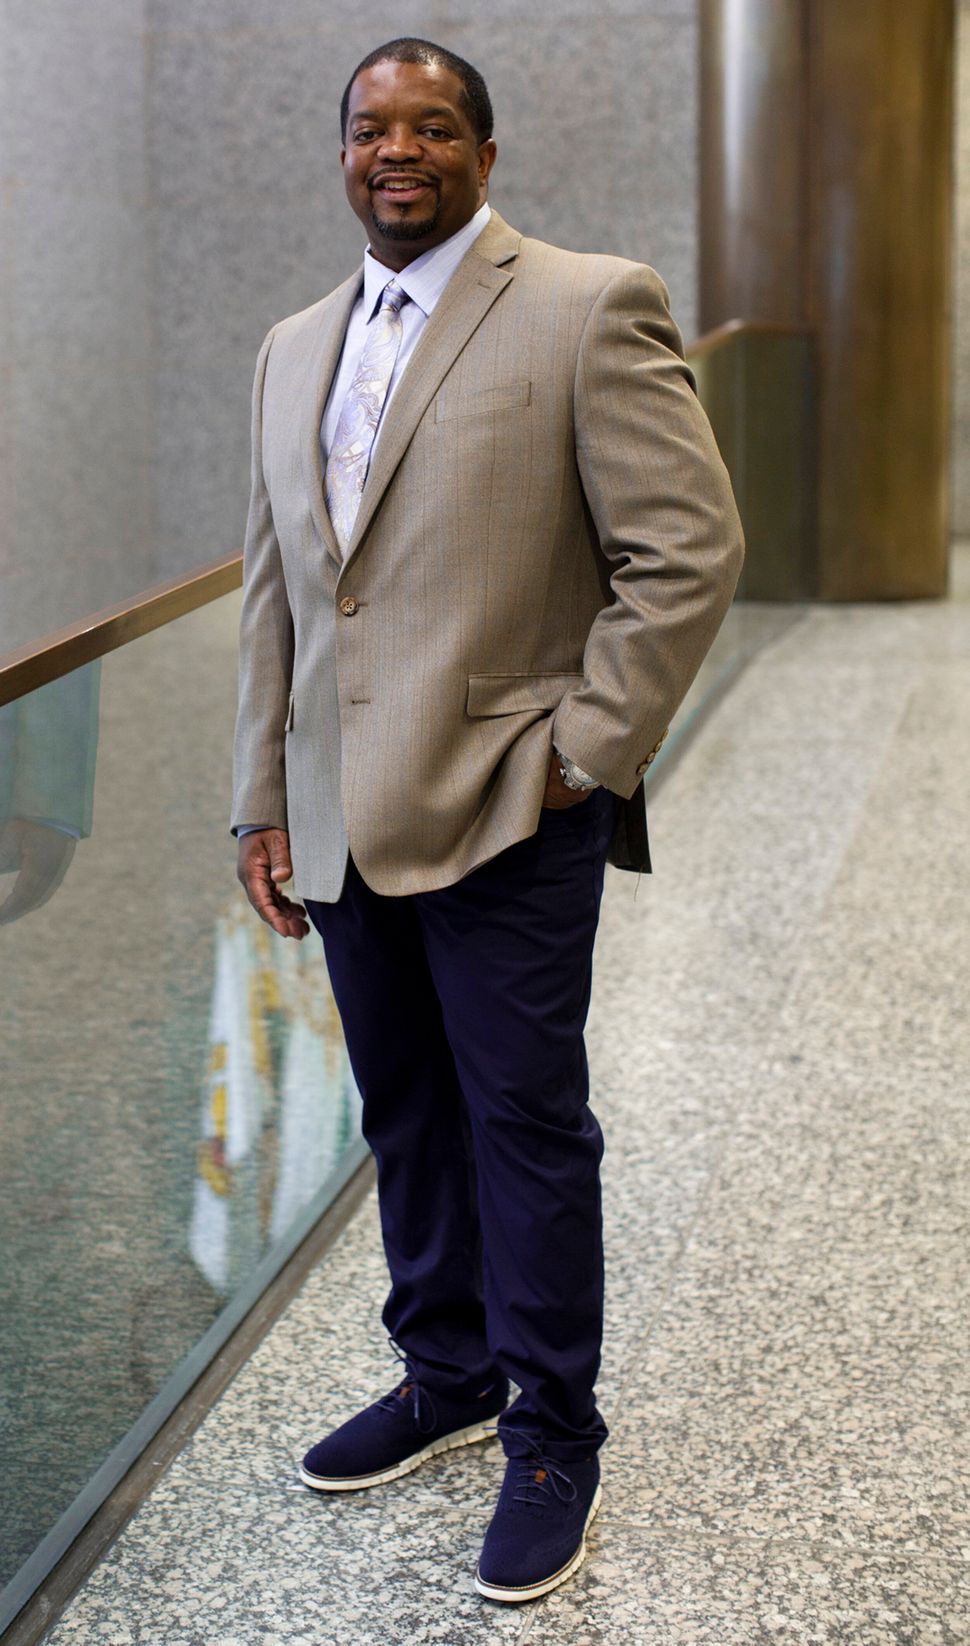 Assistant public defender Anthony Williams poses for a portrait at the Markham courthouse.